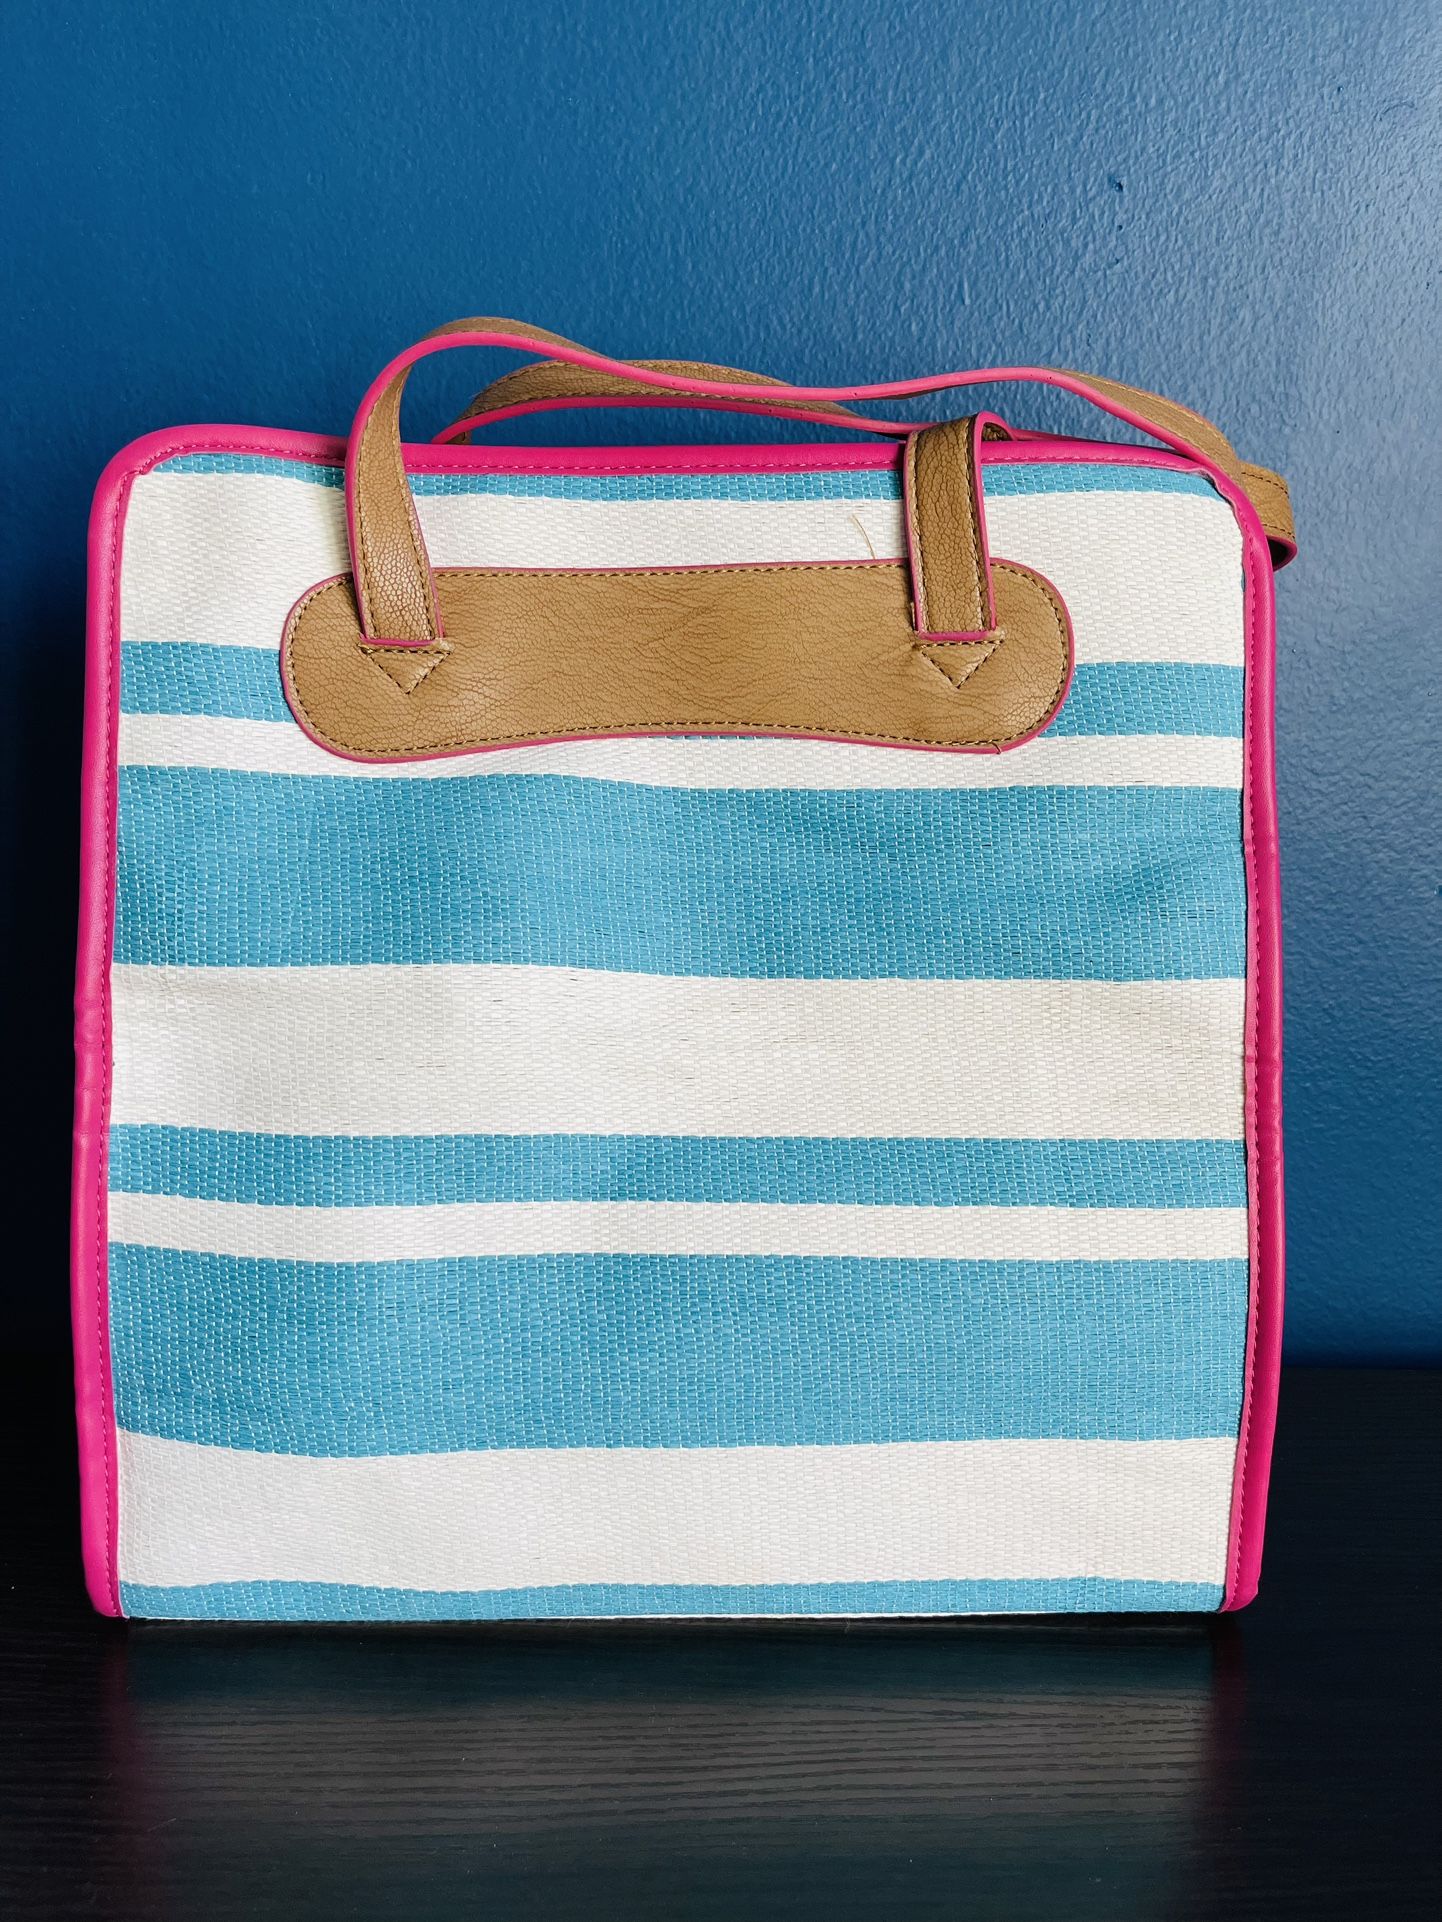 New blue and white striped large rectangular beach bag, fresh and easy to match, large capacity